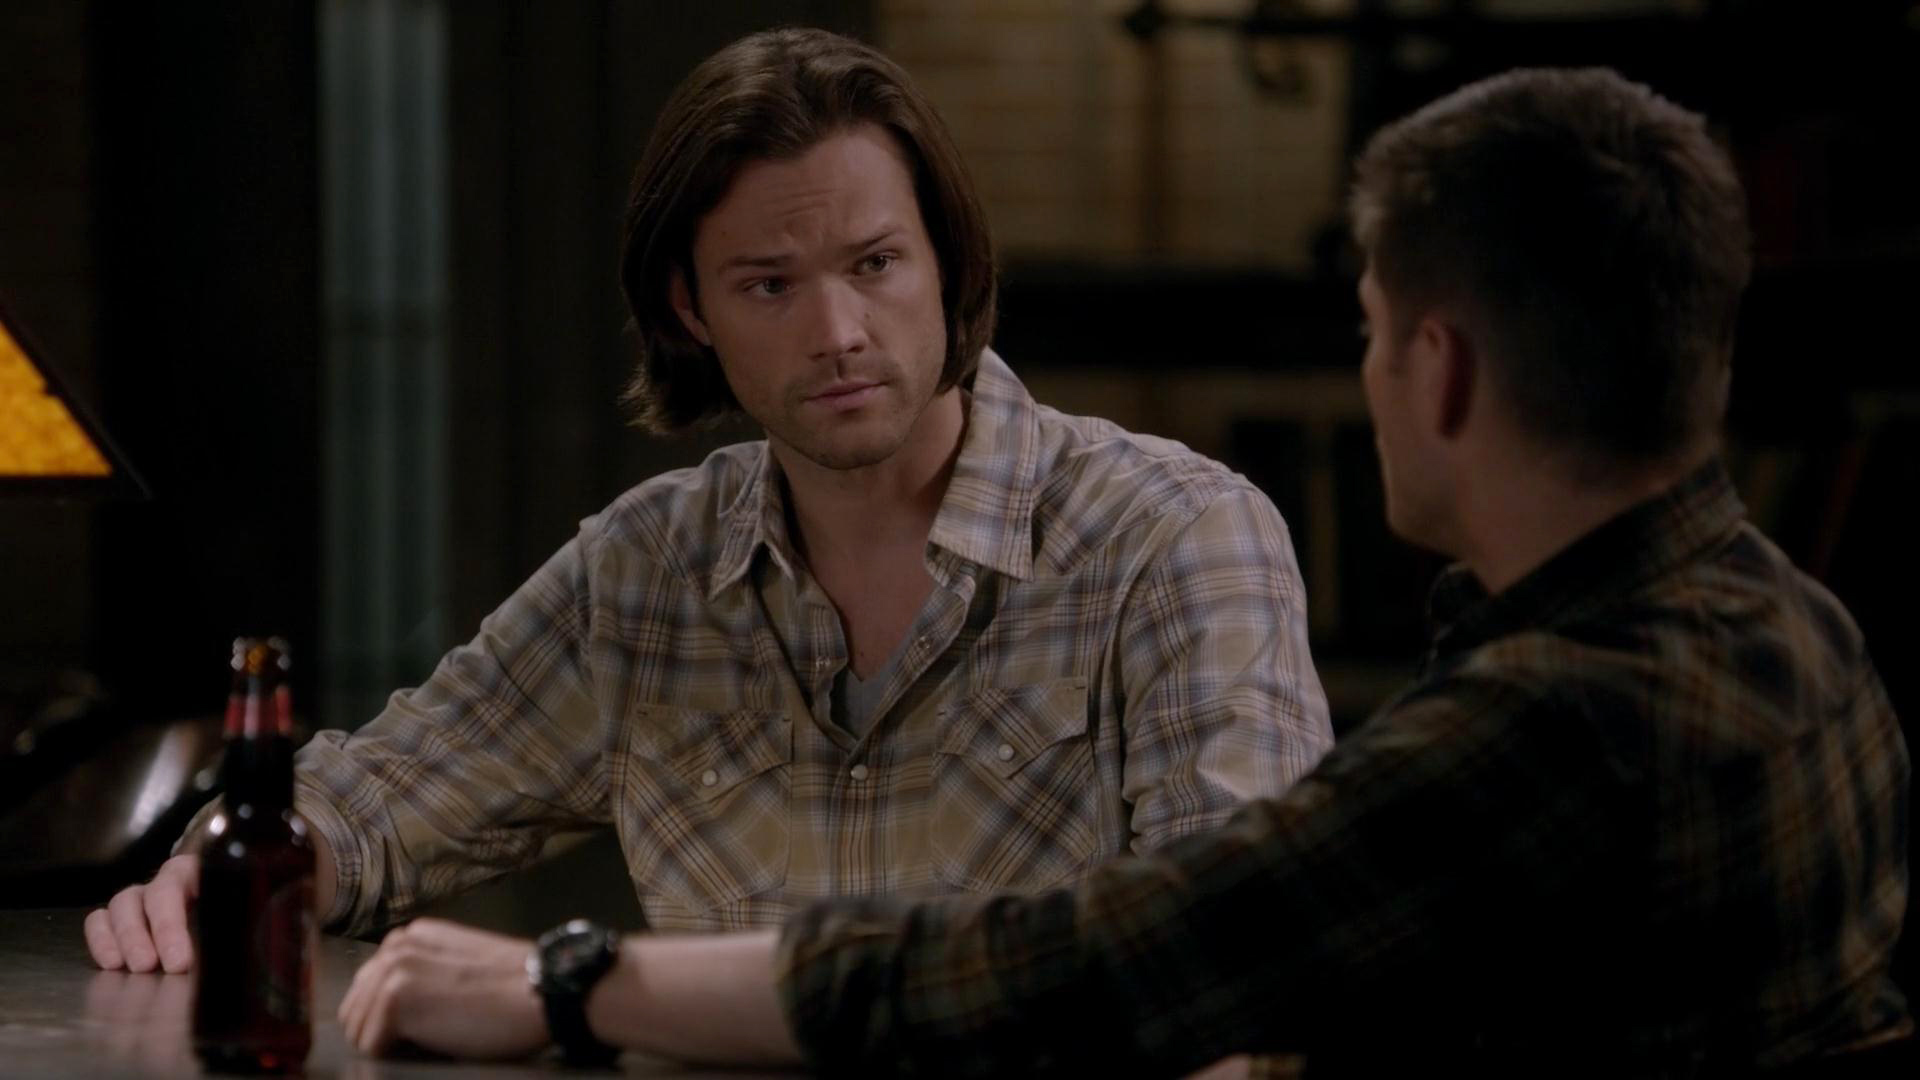 Need more friends the hunt. Supernatural 10x21 фото. Calm down and watch Supernatural.